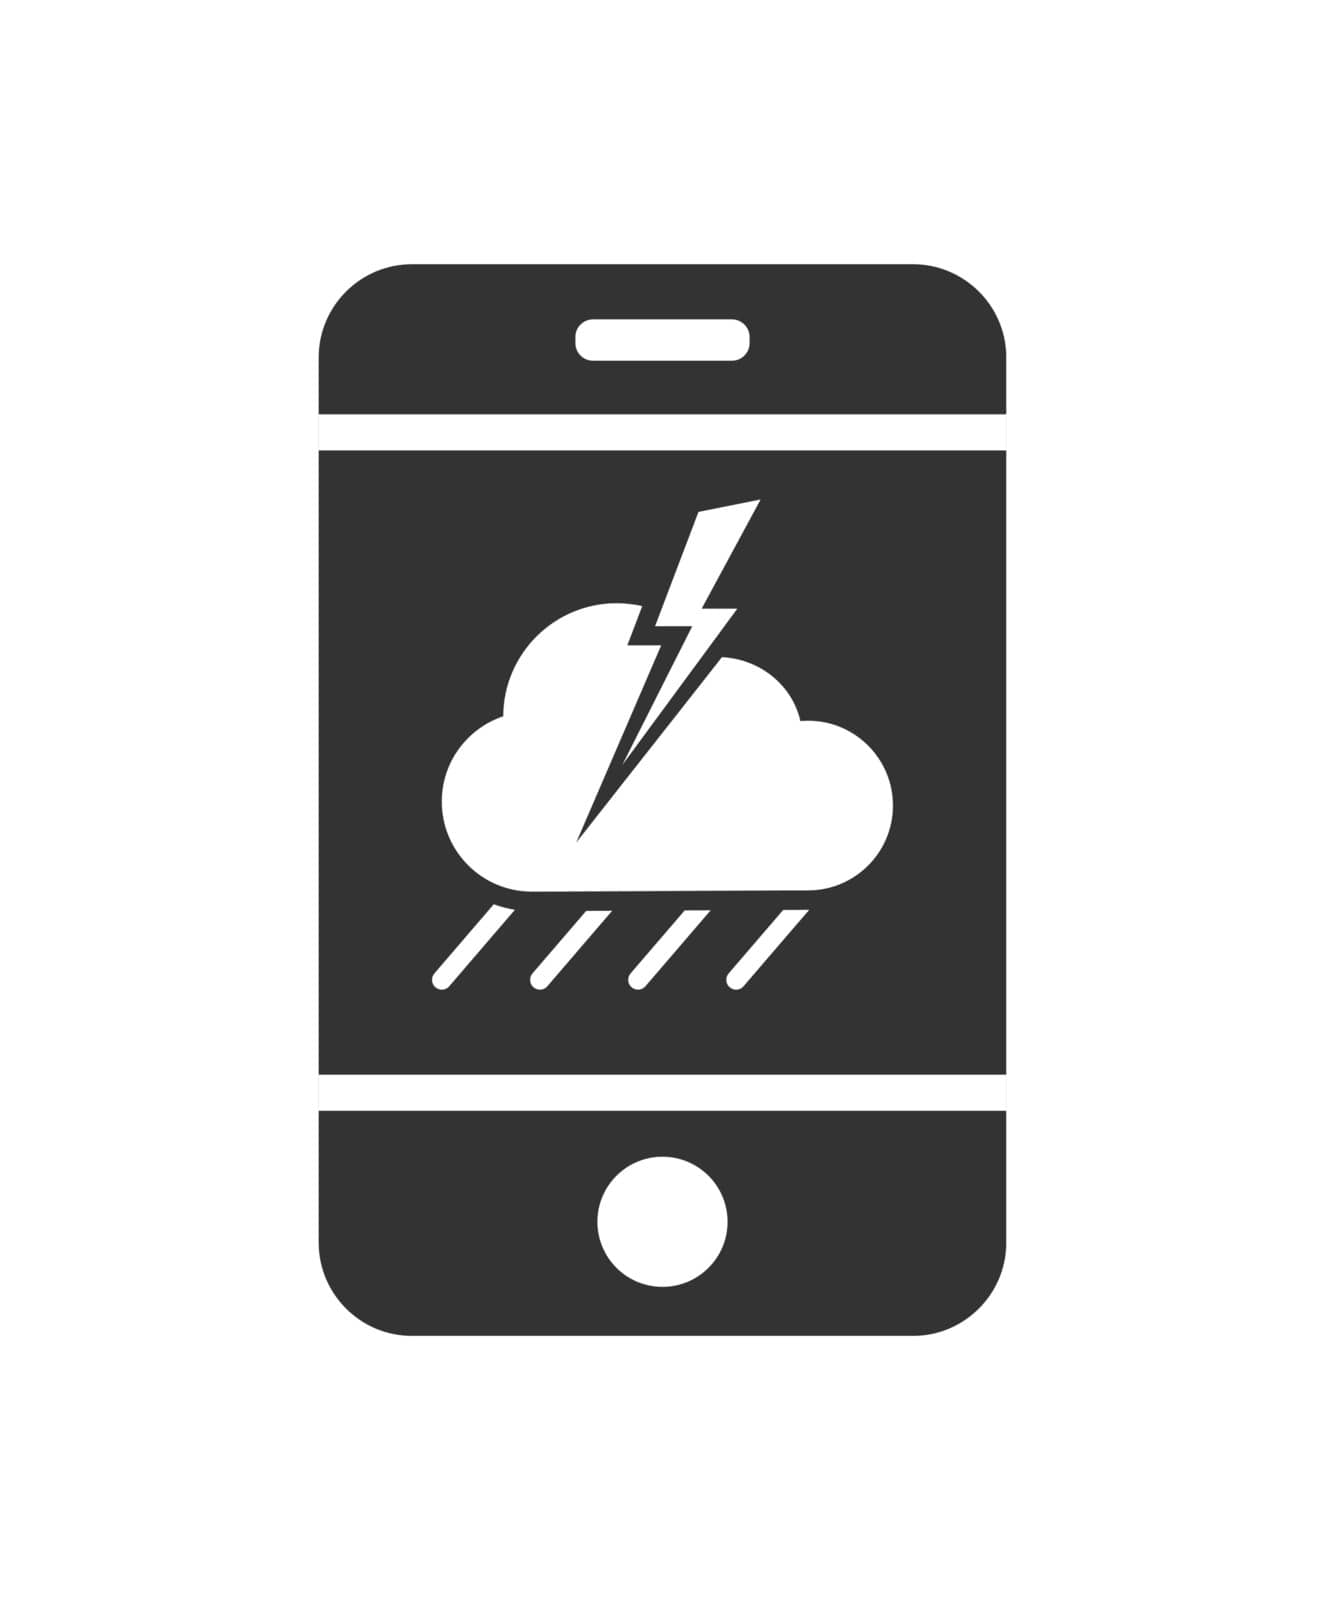 Vector mobile phone icon with a cloudy icon with rain and thunderstorm. Simple flat design for apps and web sites.
